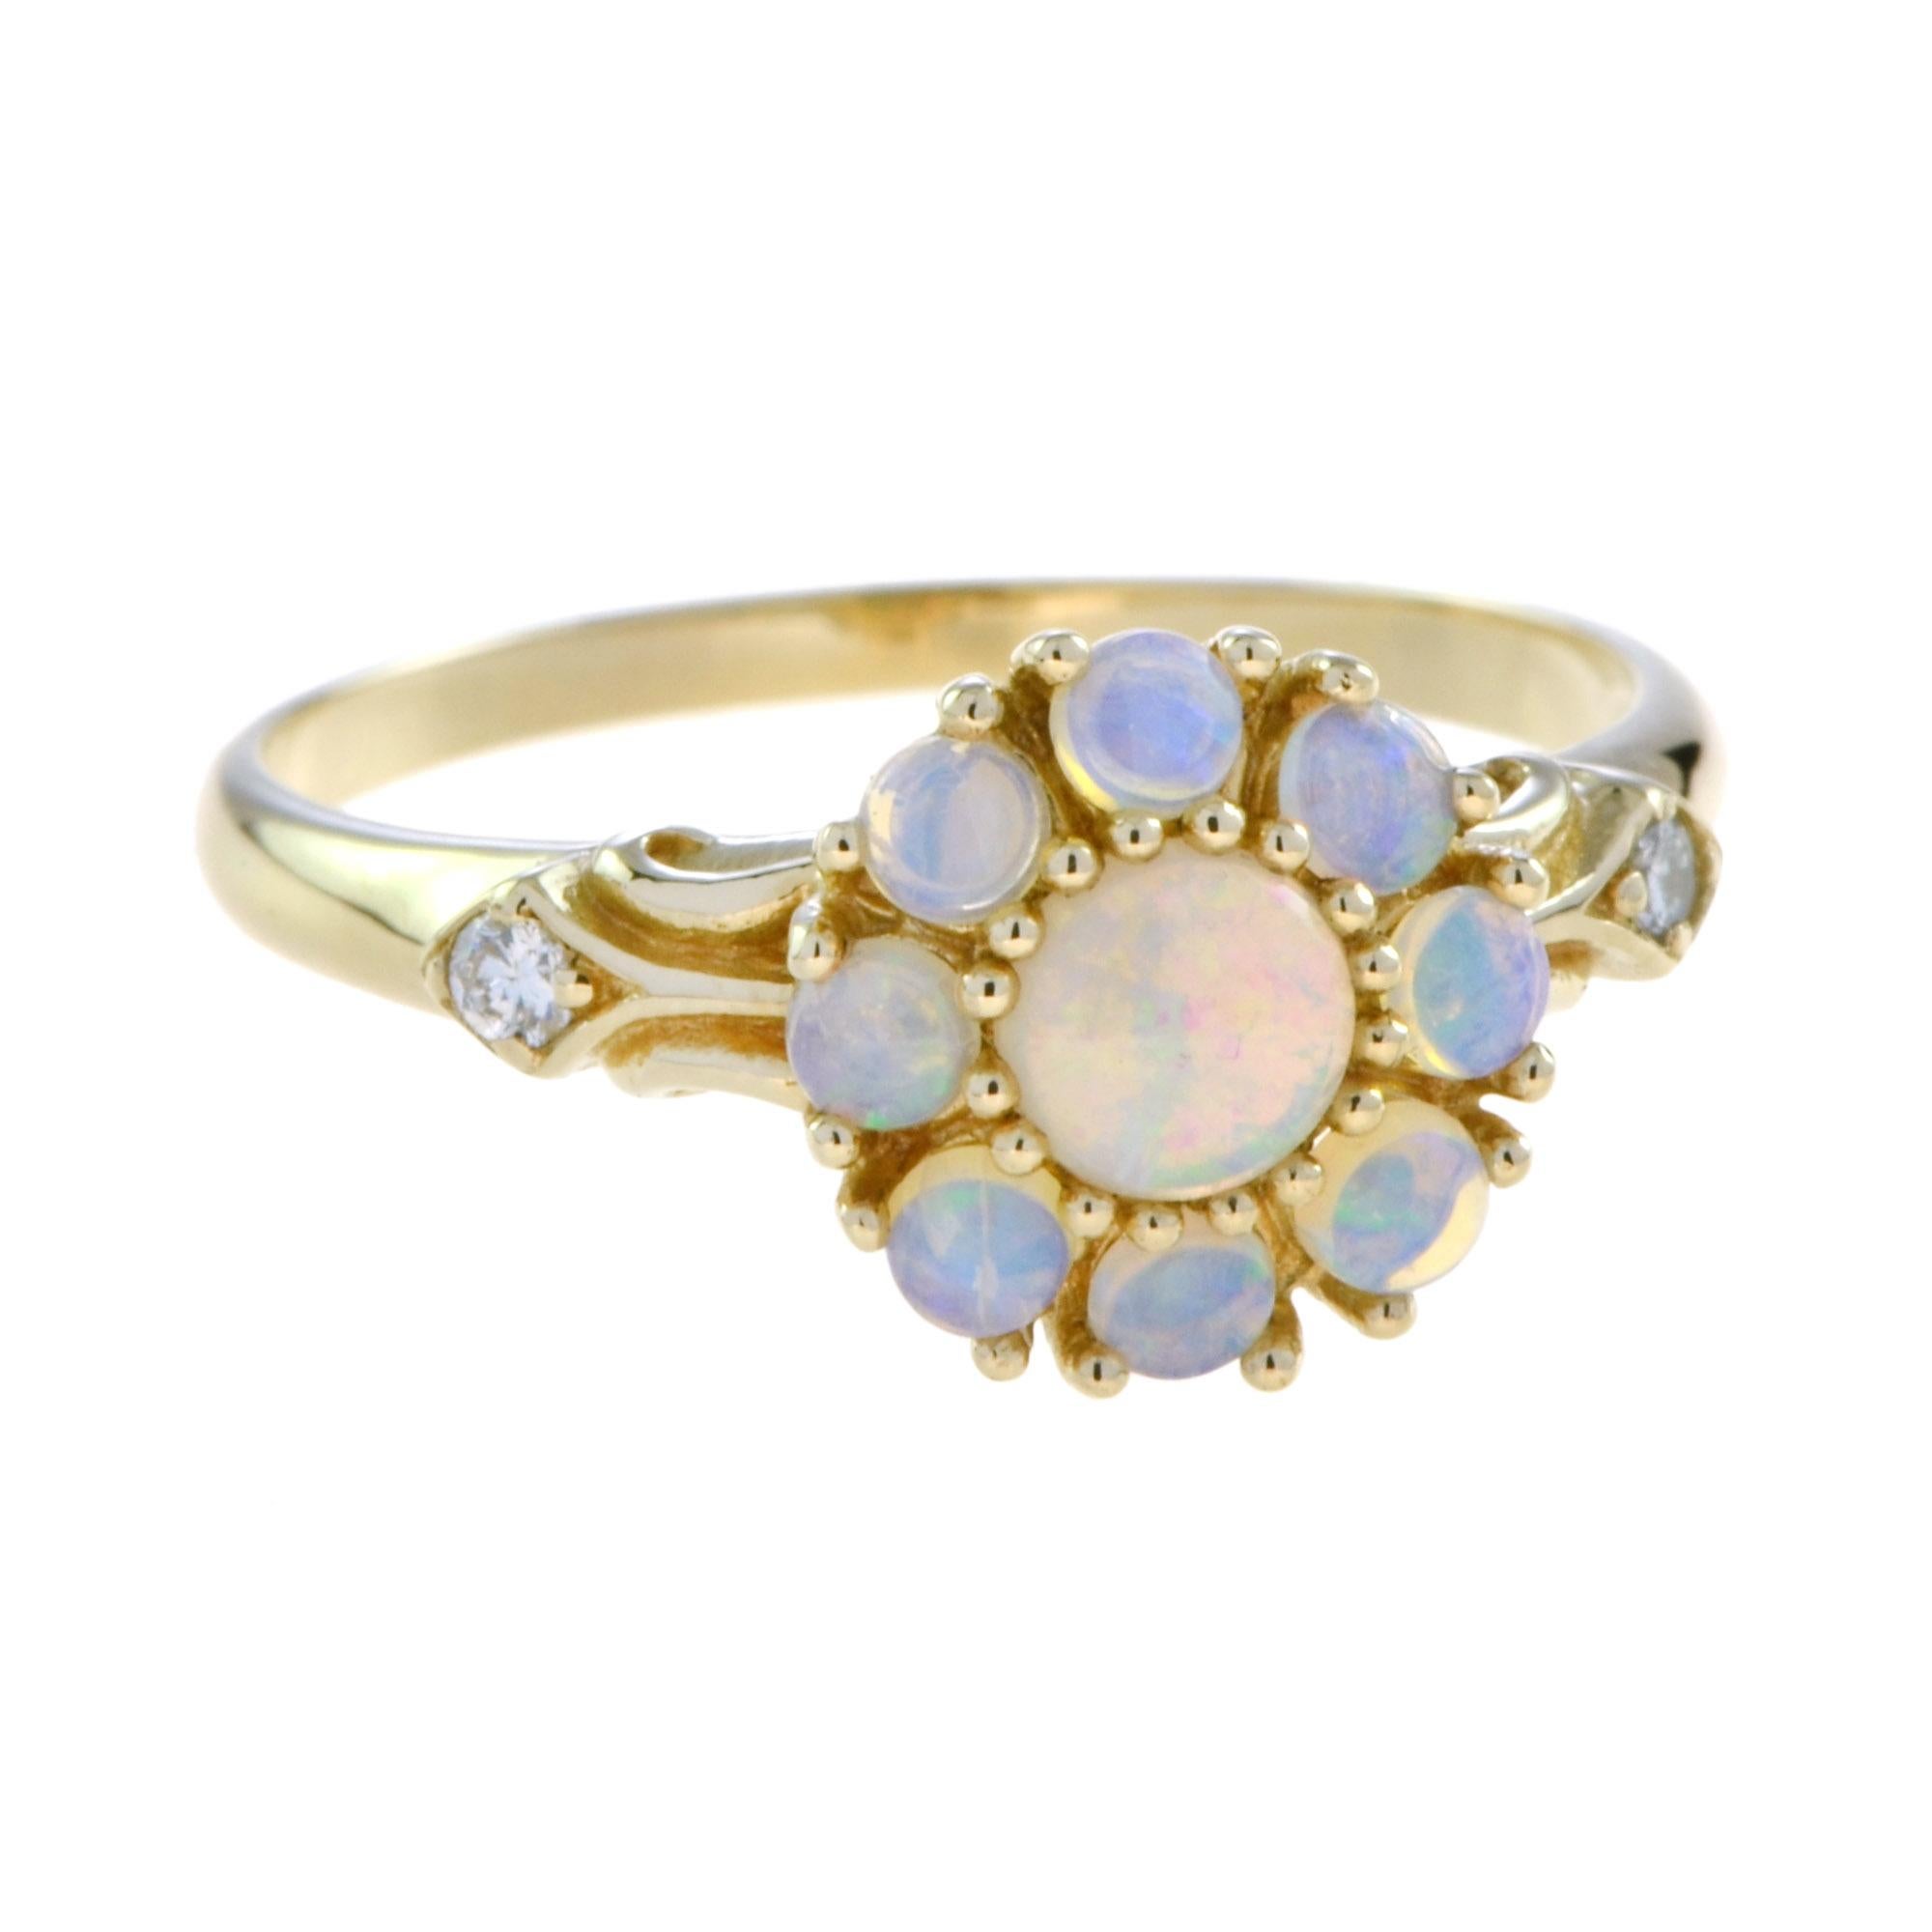 For Sale:  Vintage Style Opal Floral Cluster Ring in 14K Yellow Gold 4